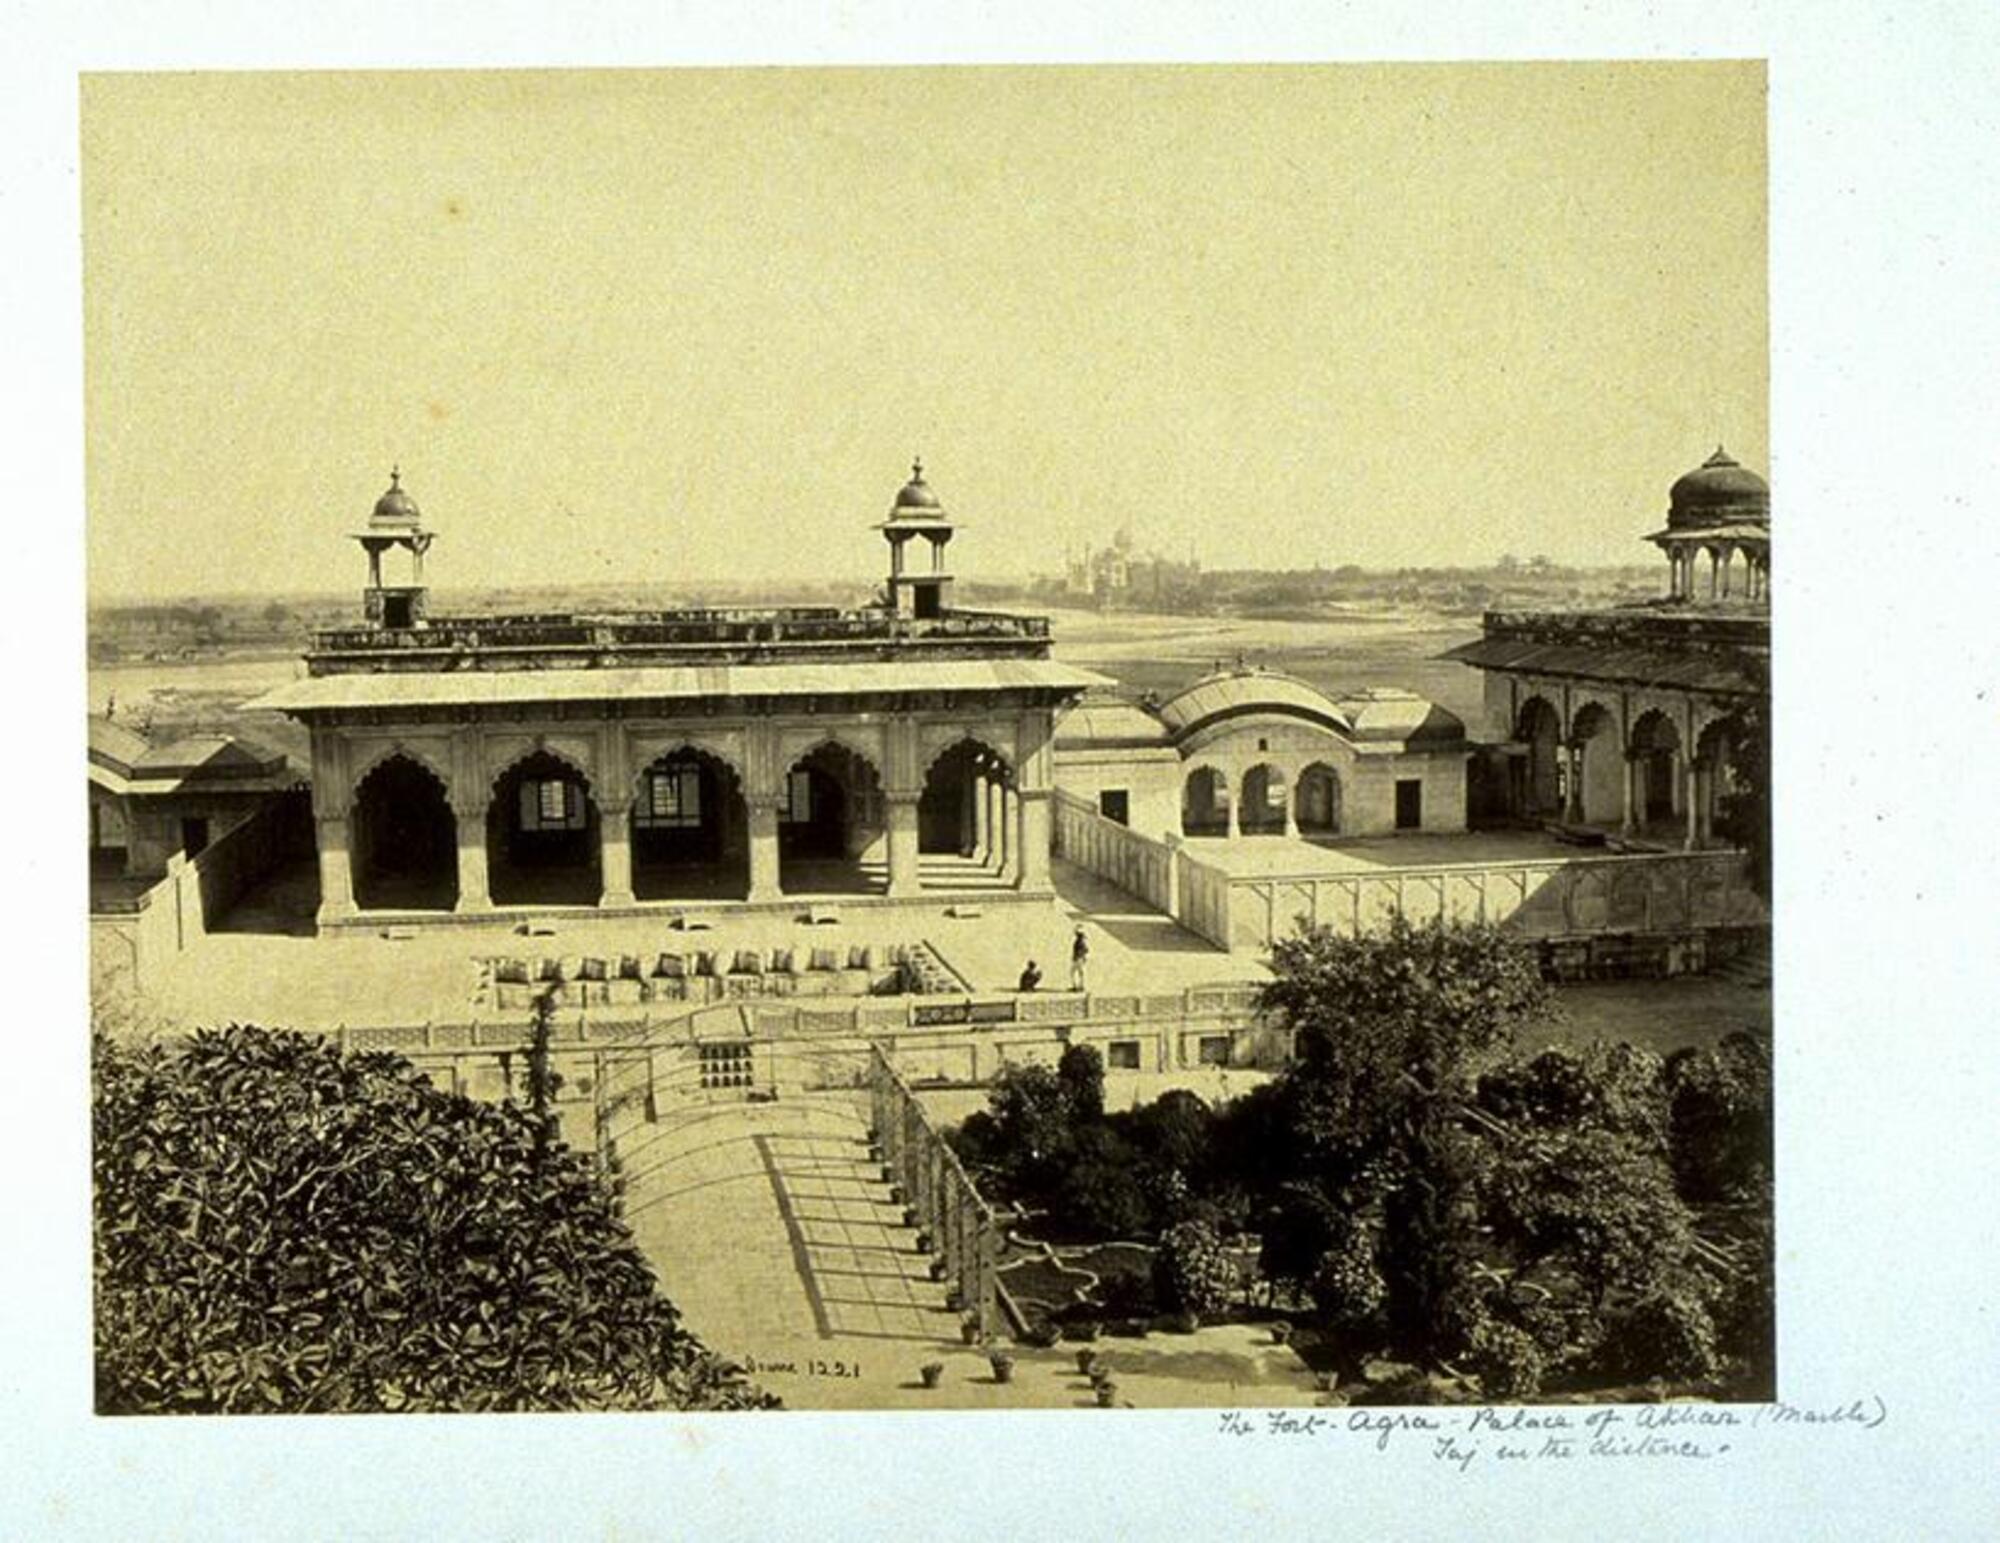 This photograph depicts a panorama view of a palatial structure with archways and two domed watchtowers on its roof. Before the structure stand two figures talking and a garden full of trees and potted plants.